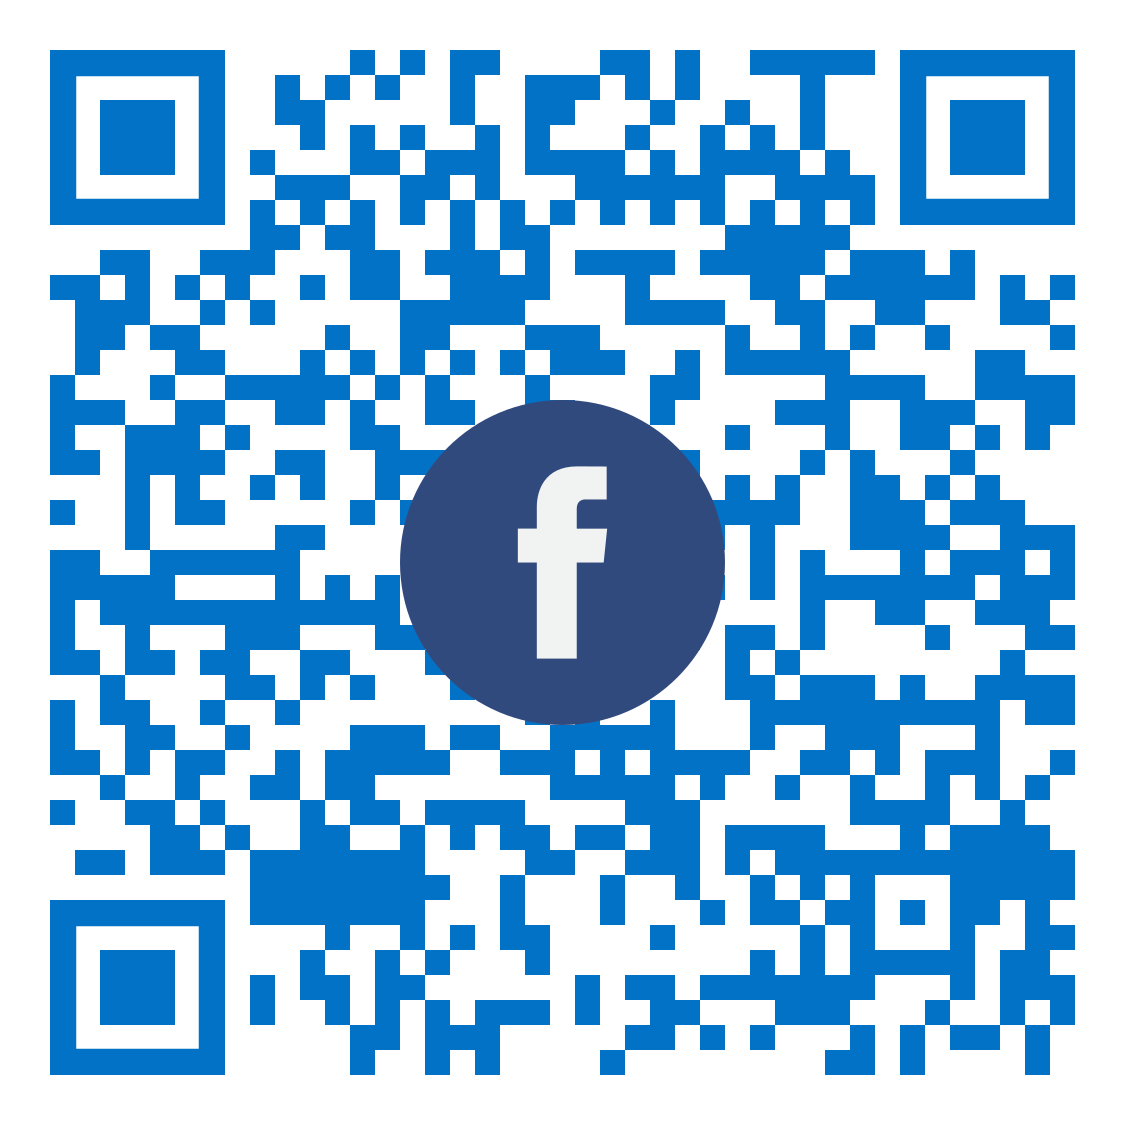 Kenai Community Center Facebook QR code - scan with your smartphone